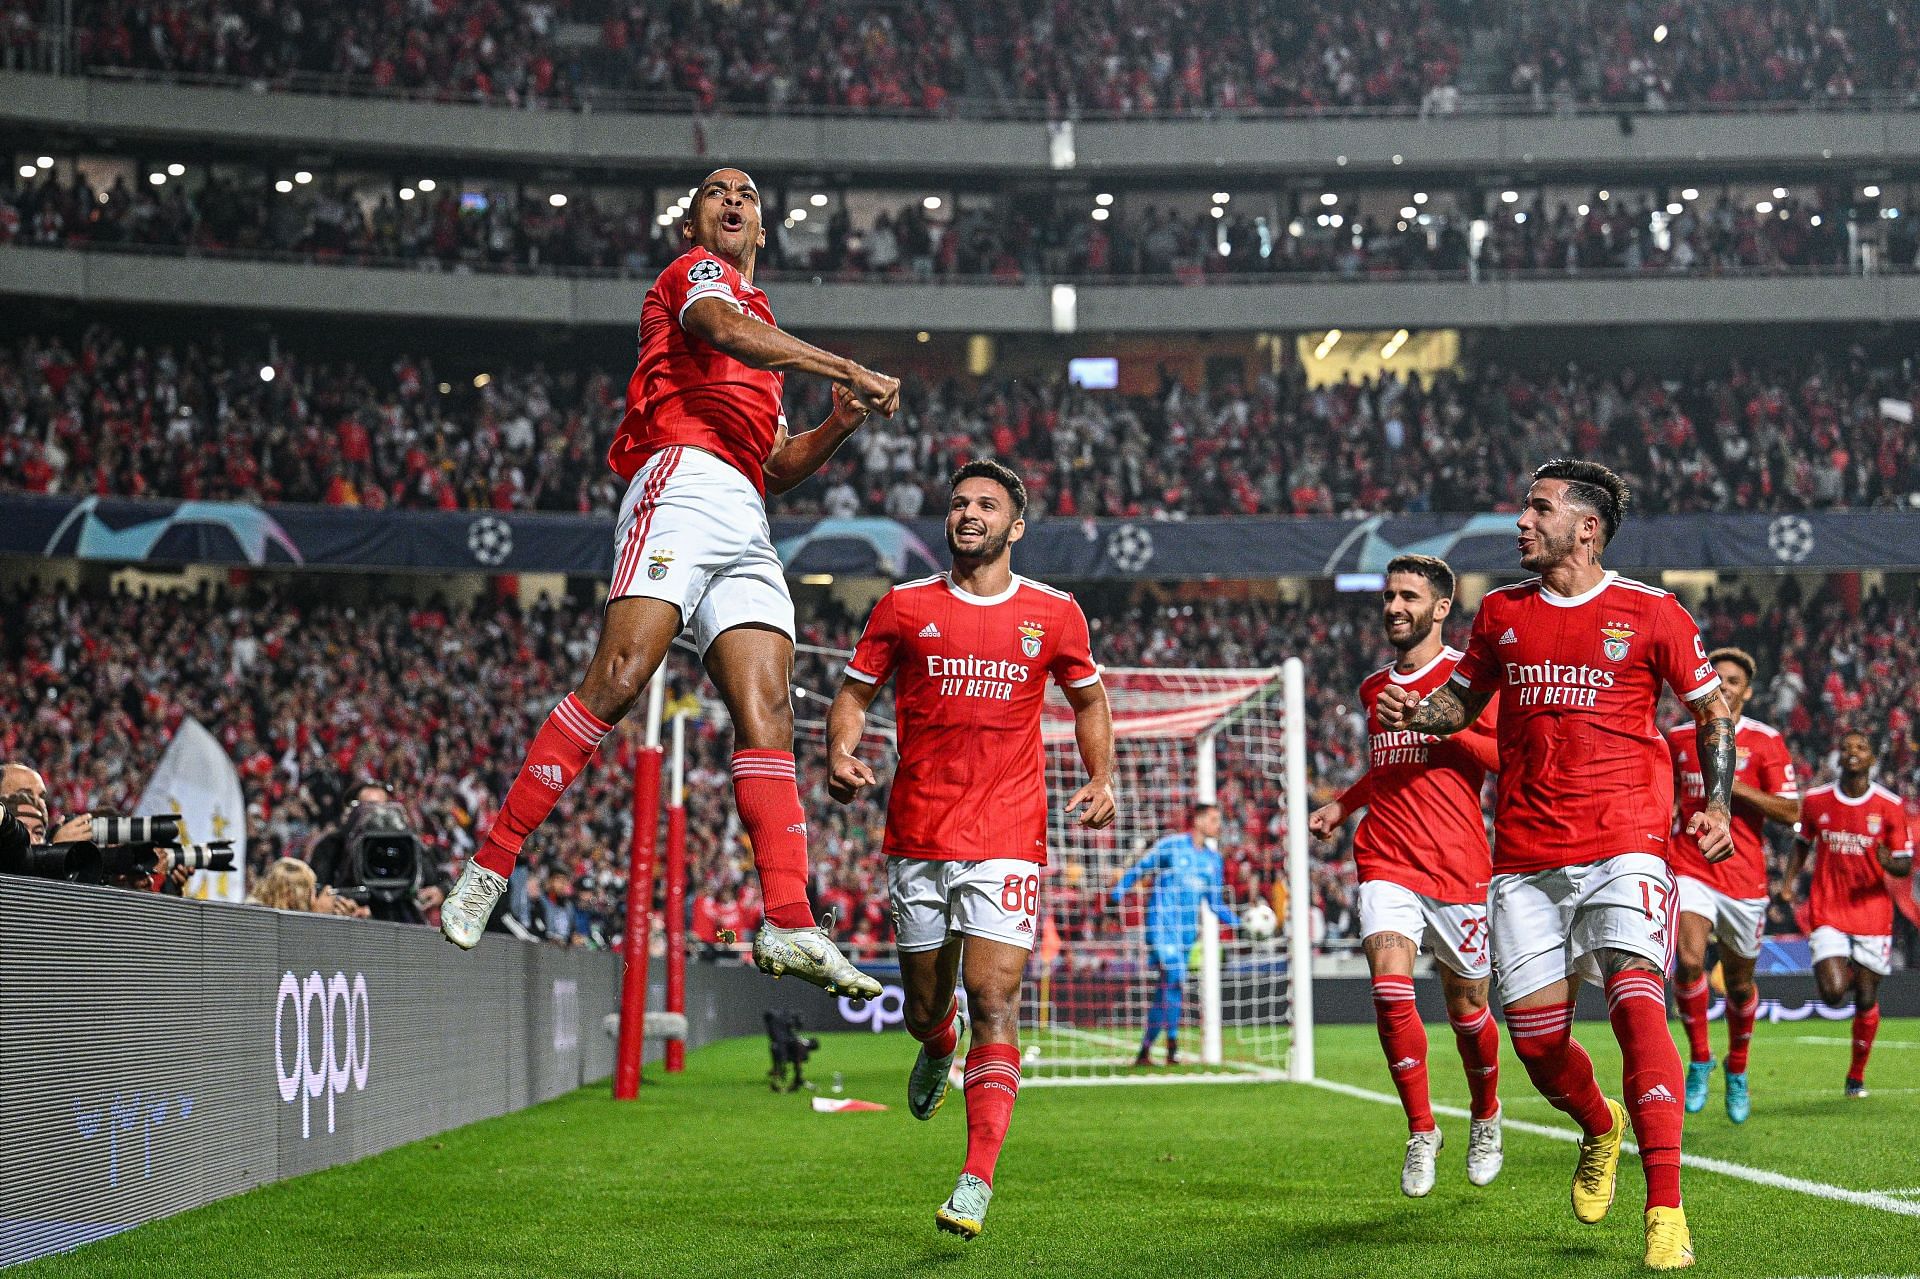 Benfica finished top of Group H - UEFA Champions League